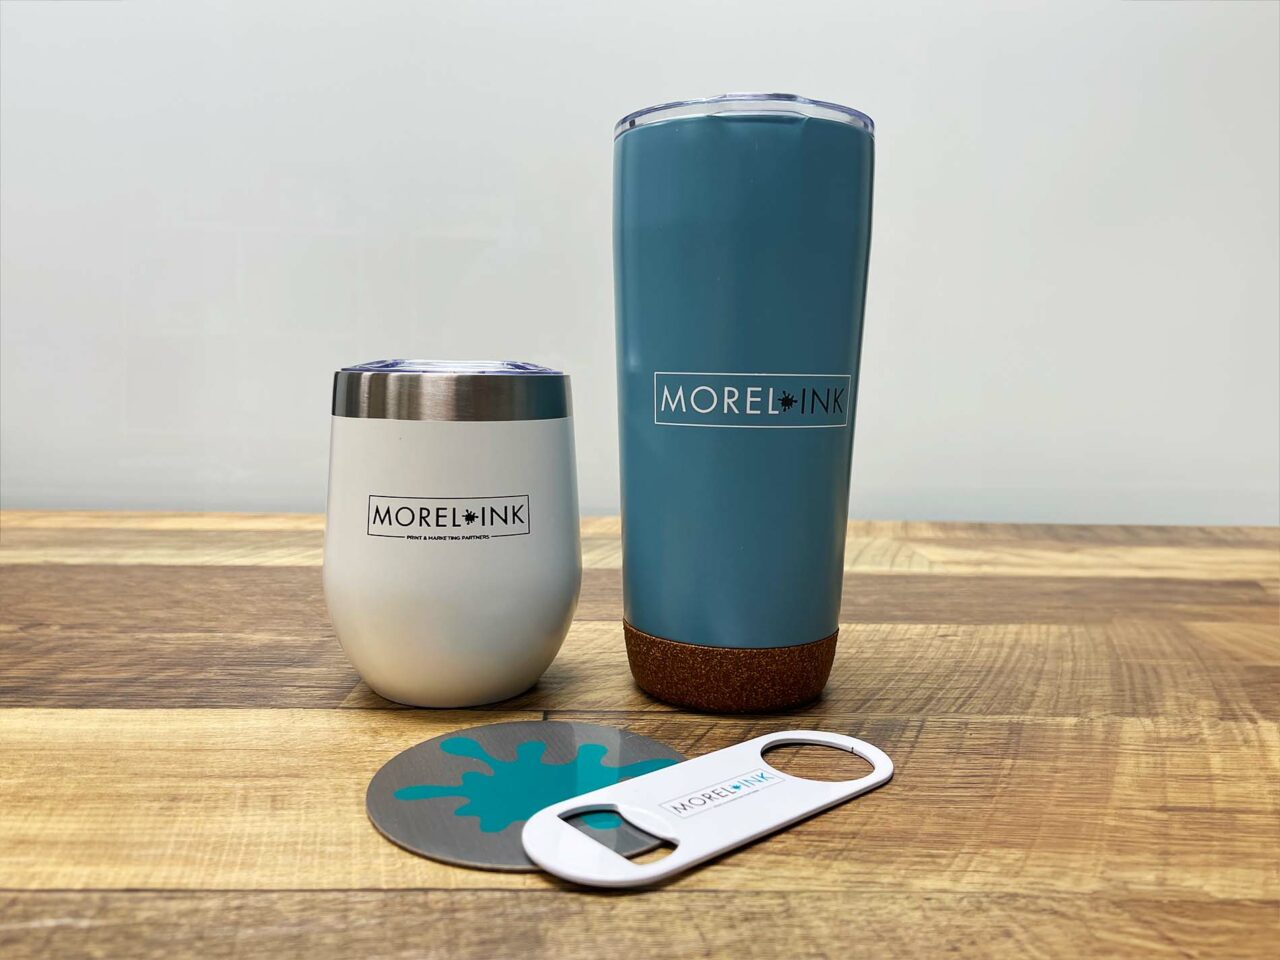 Example of Morel's promotional capabilities, showing custom branded tumblers, coaster, and bottle opener